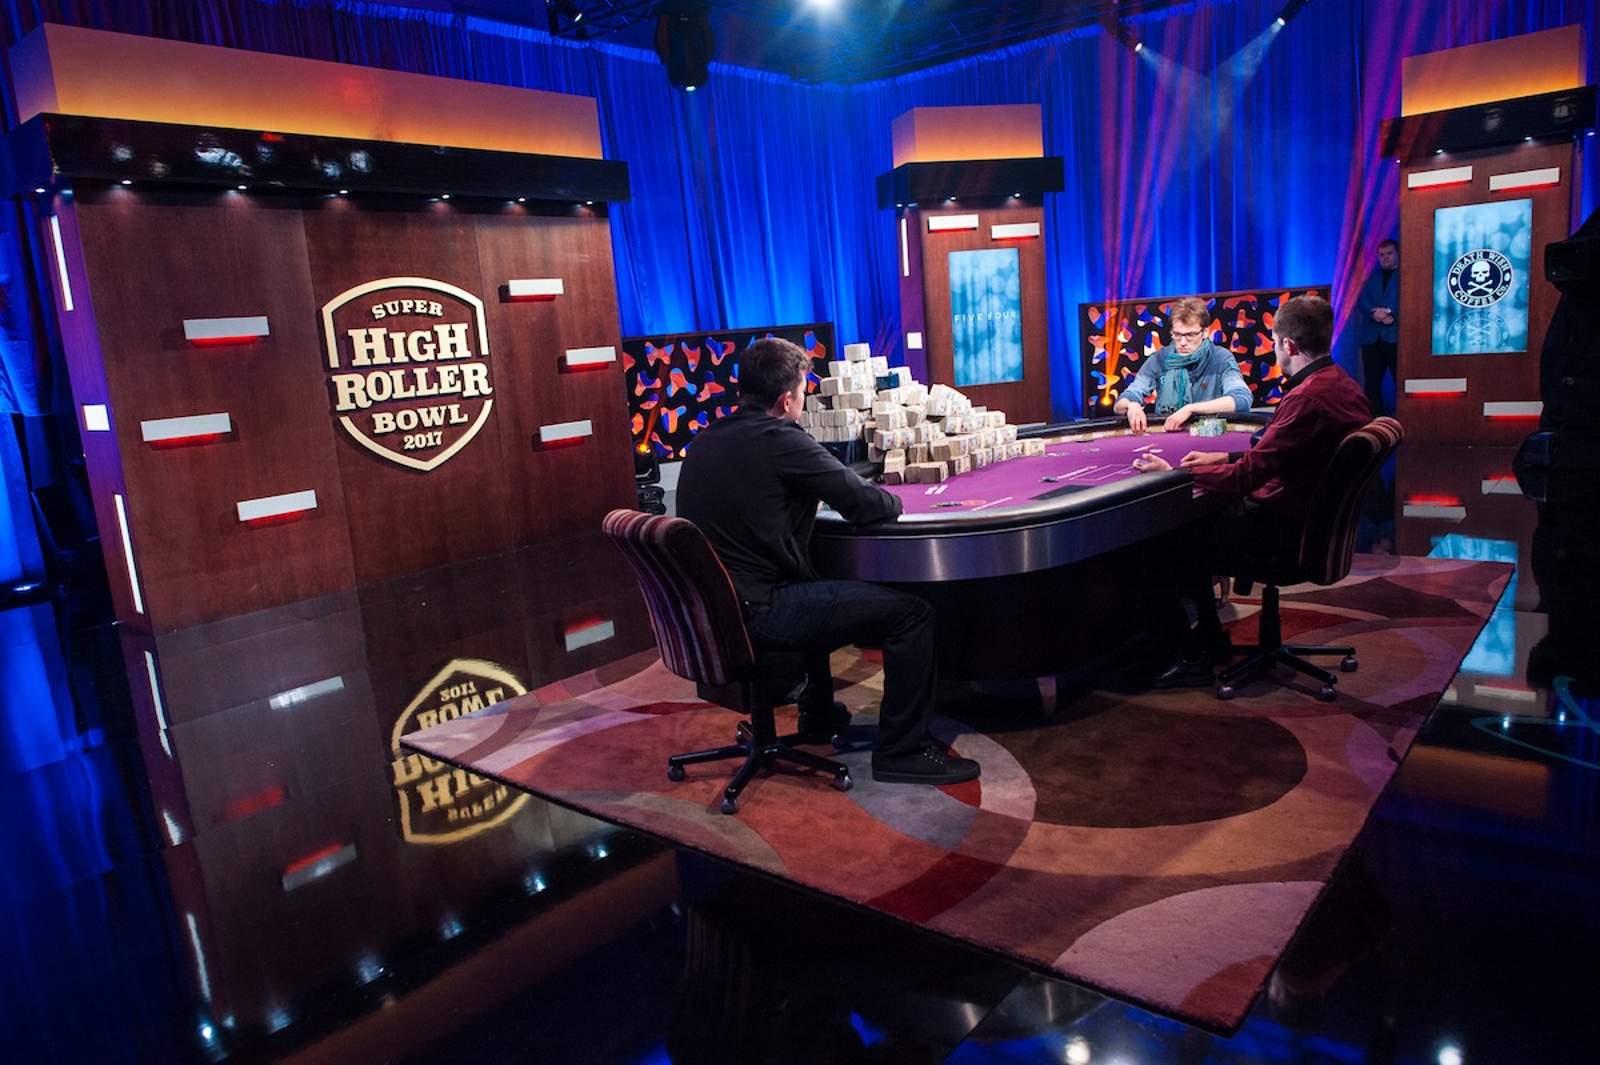 Negreanu and Hellmuth Among 2018 Super High Roller Bowl Lottery Winners